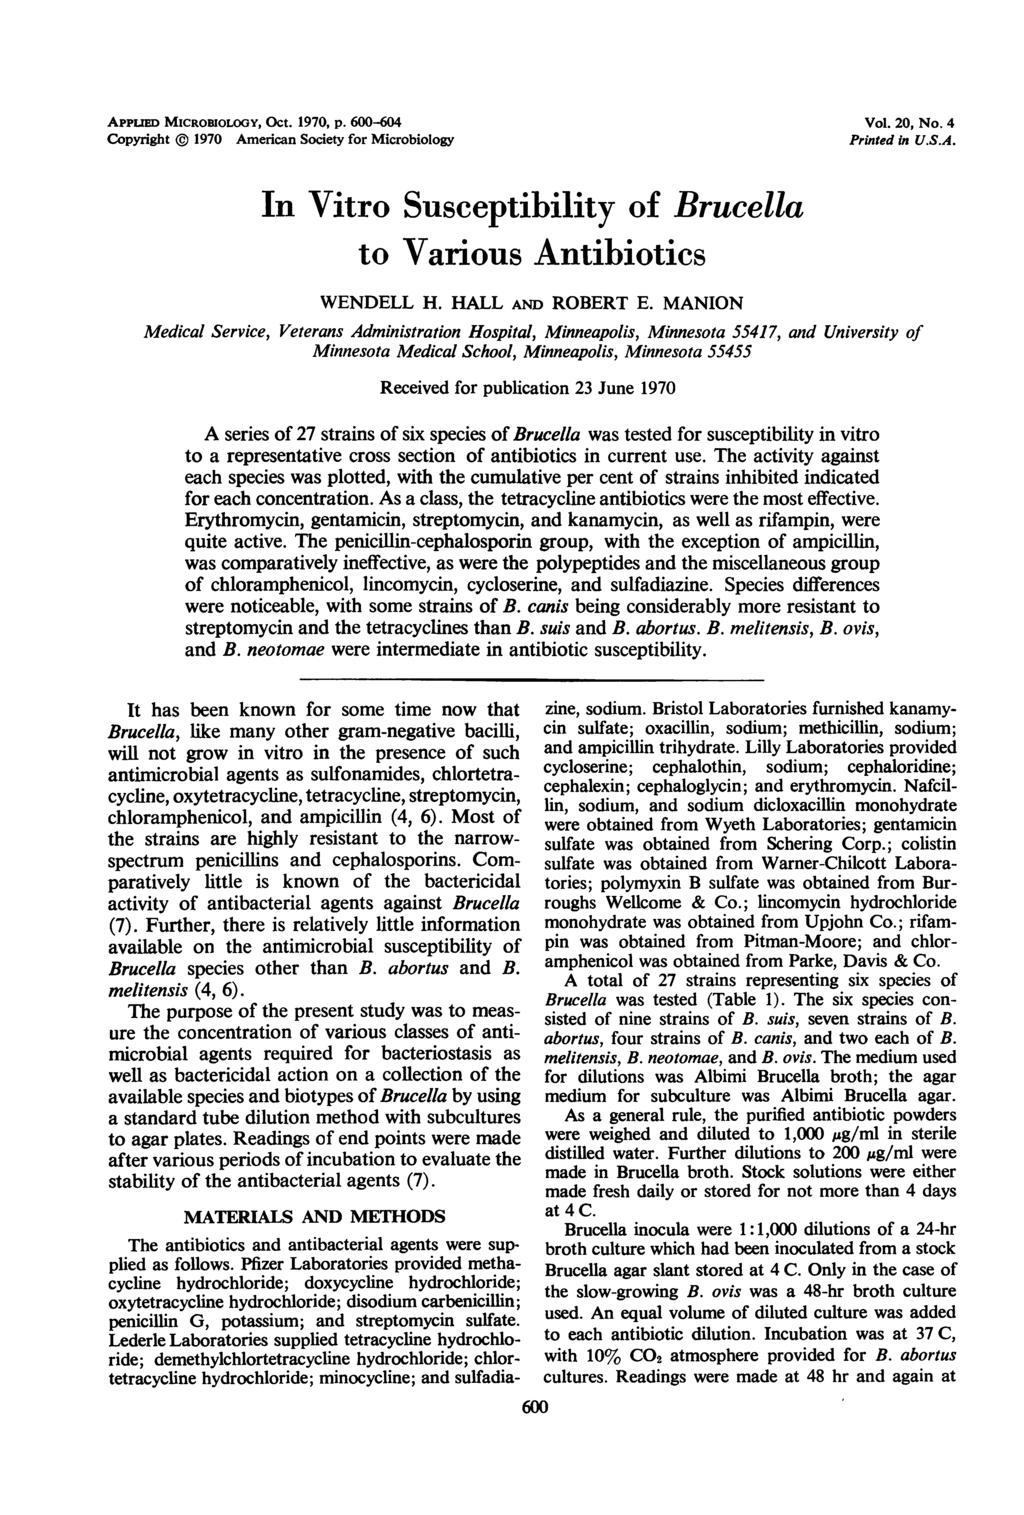 APPuED MICROBIOLOGY, Oct. 1970, p. 600-604 Vol. 20, No. 4 Copyright 1970 American Society for Microbiology Printed in U.S.A. In Vitro Susceptibility of Brucella to Various Antibiotics WENDELL H.